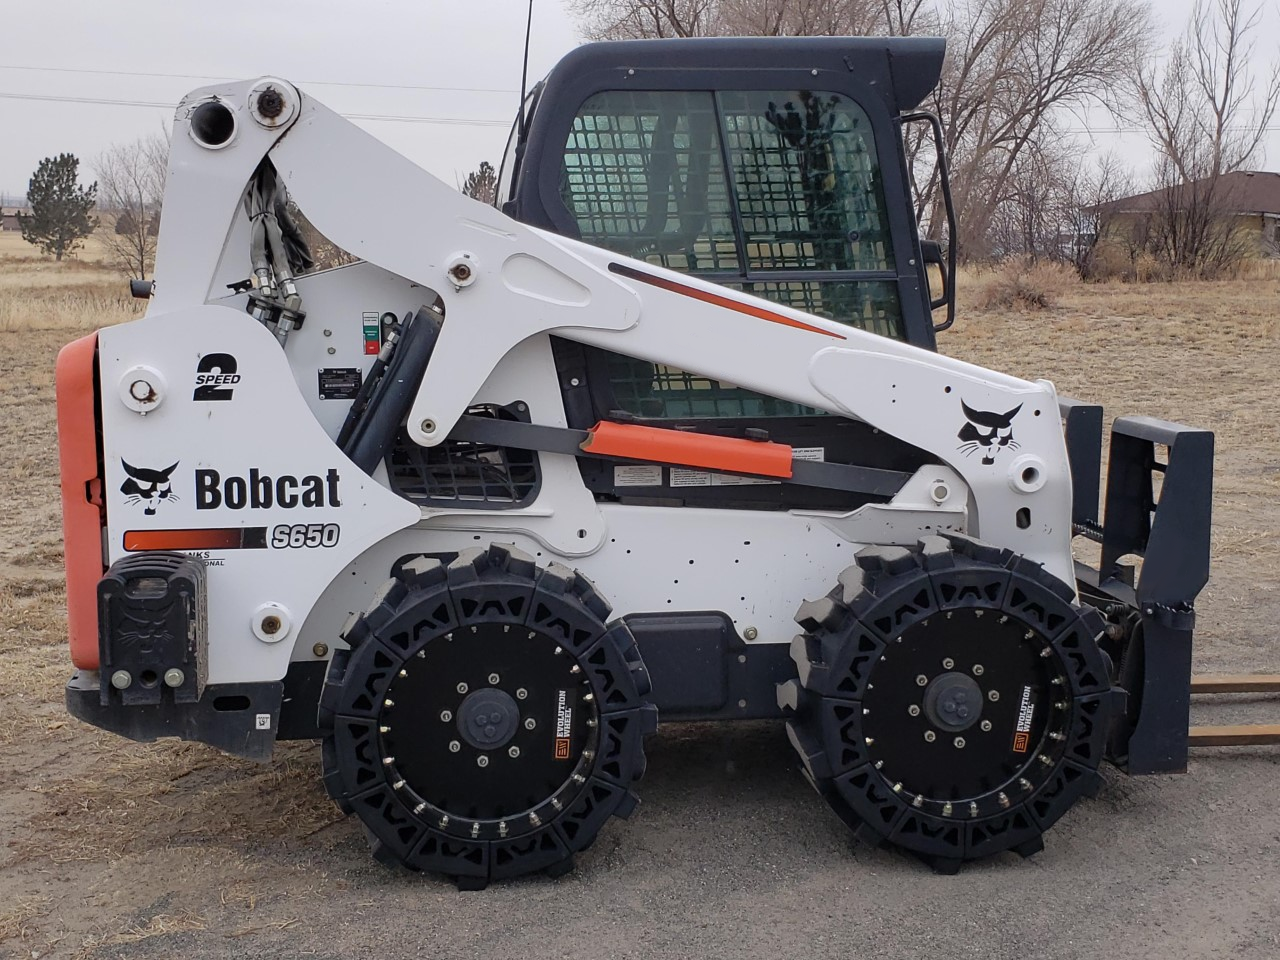 This image shows a White Bobcat S650 Skid Steer using our Bobcat all terrain skid steer tires